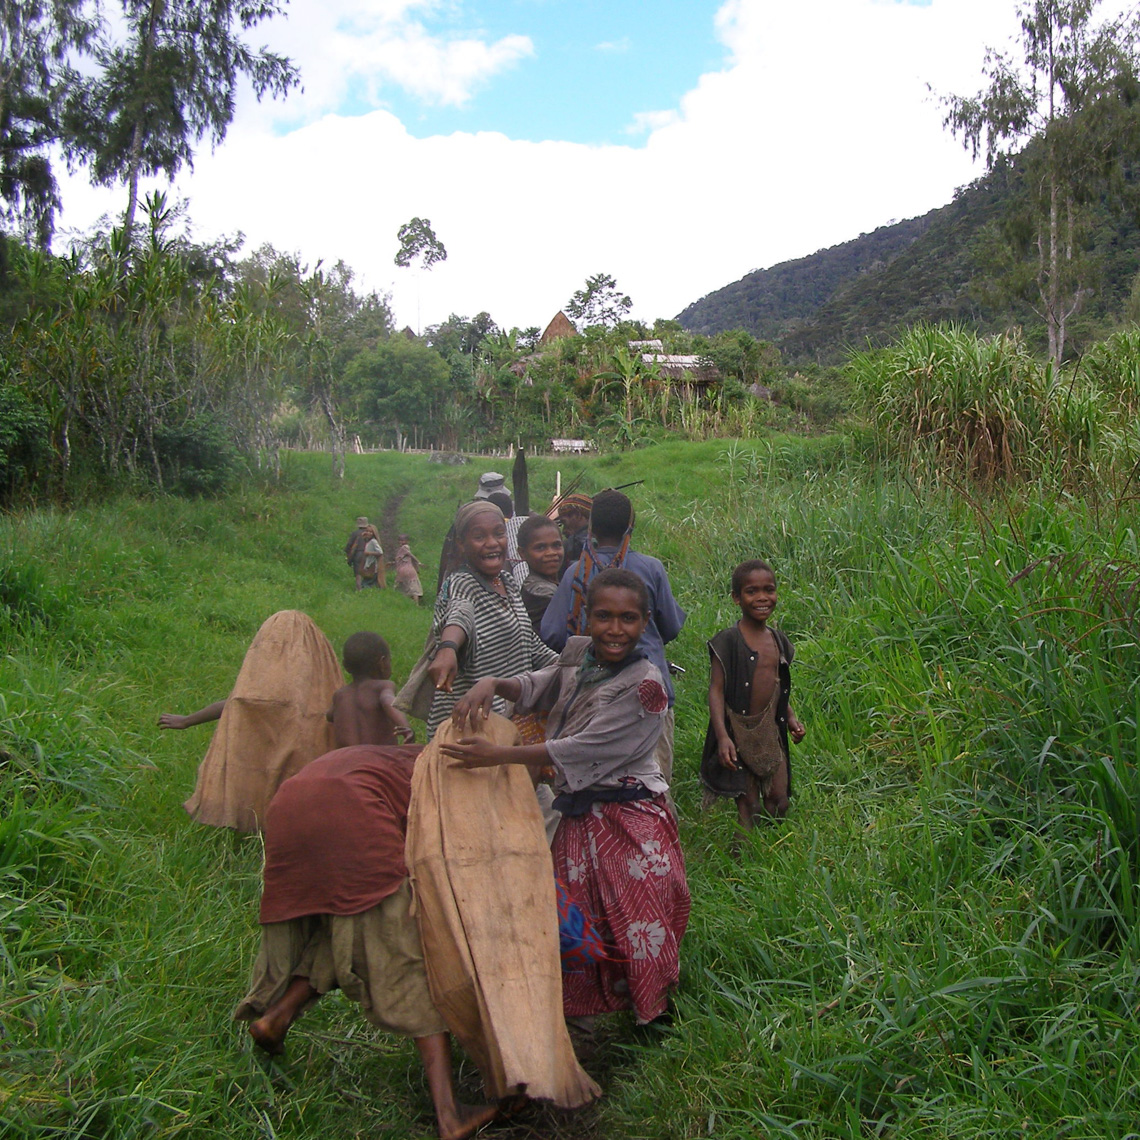 Entering a Village, Morobe Province, Field Collecting New Guinea Art.